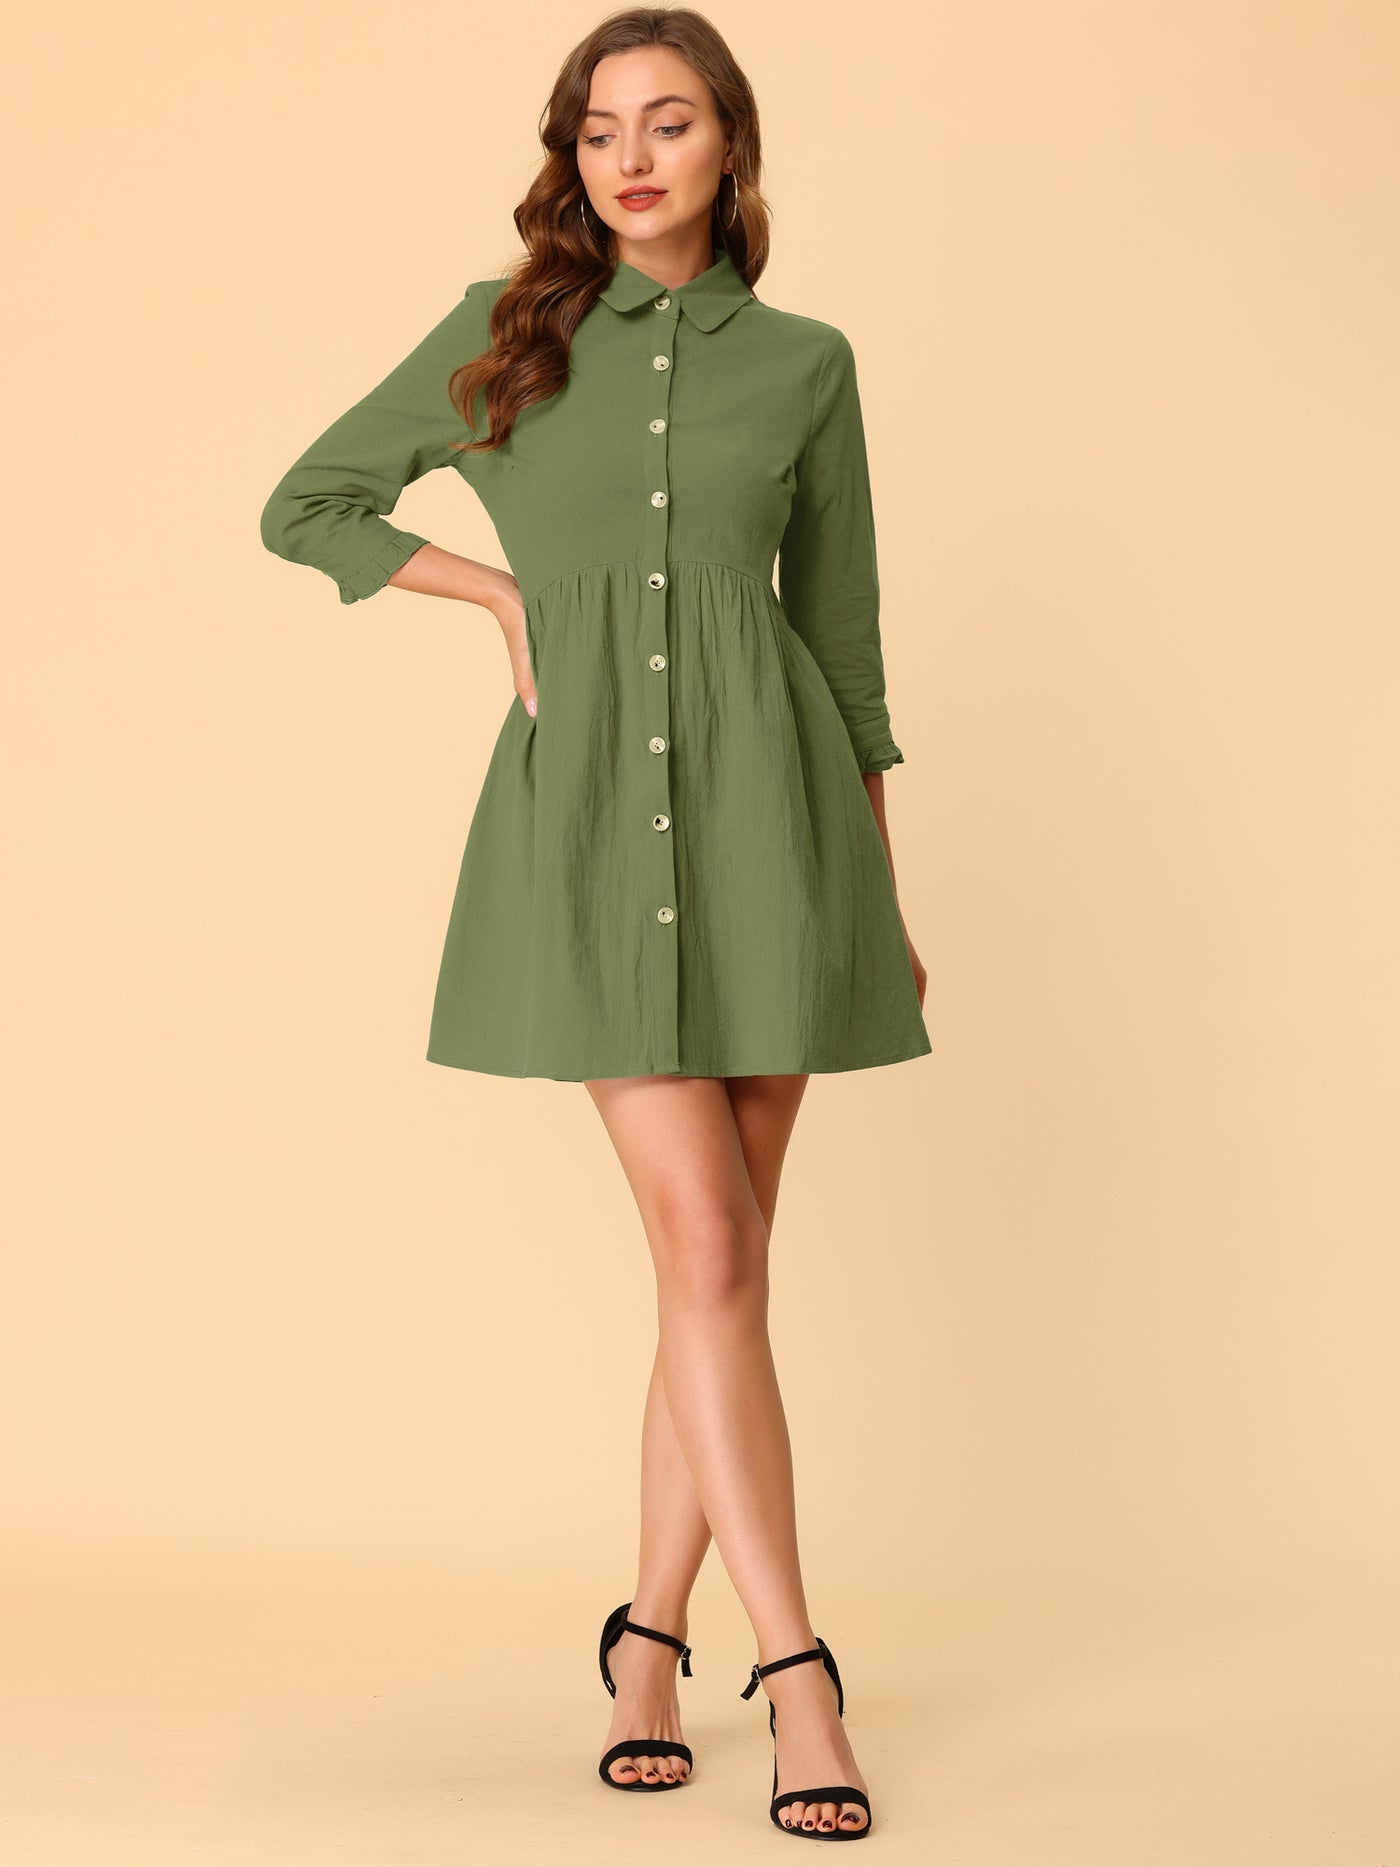 Allegra K Casual Ruched 3/4 Sleeve Button Up Mini Shirt Dress